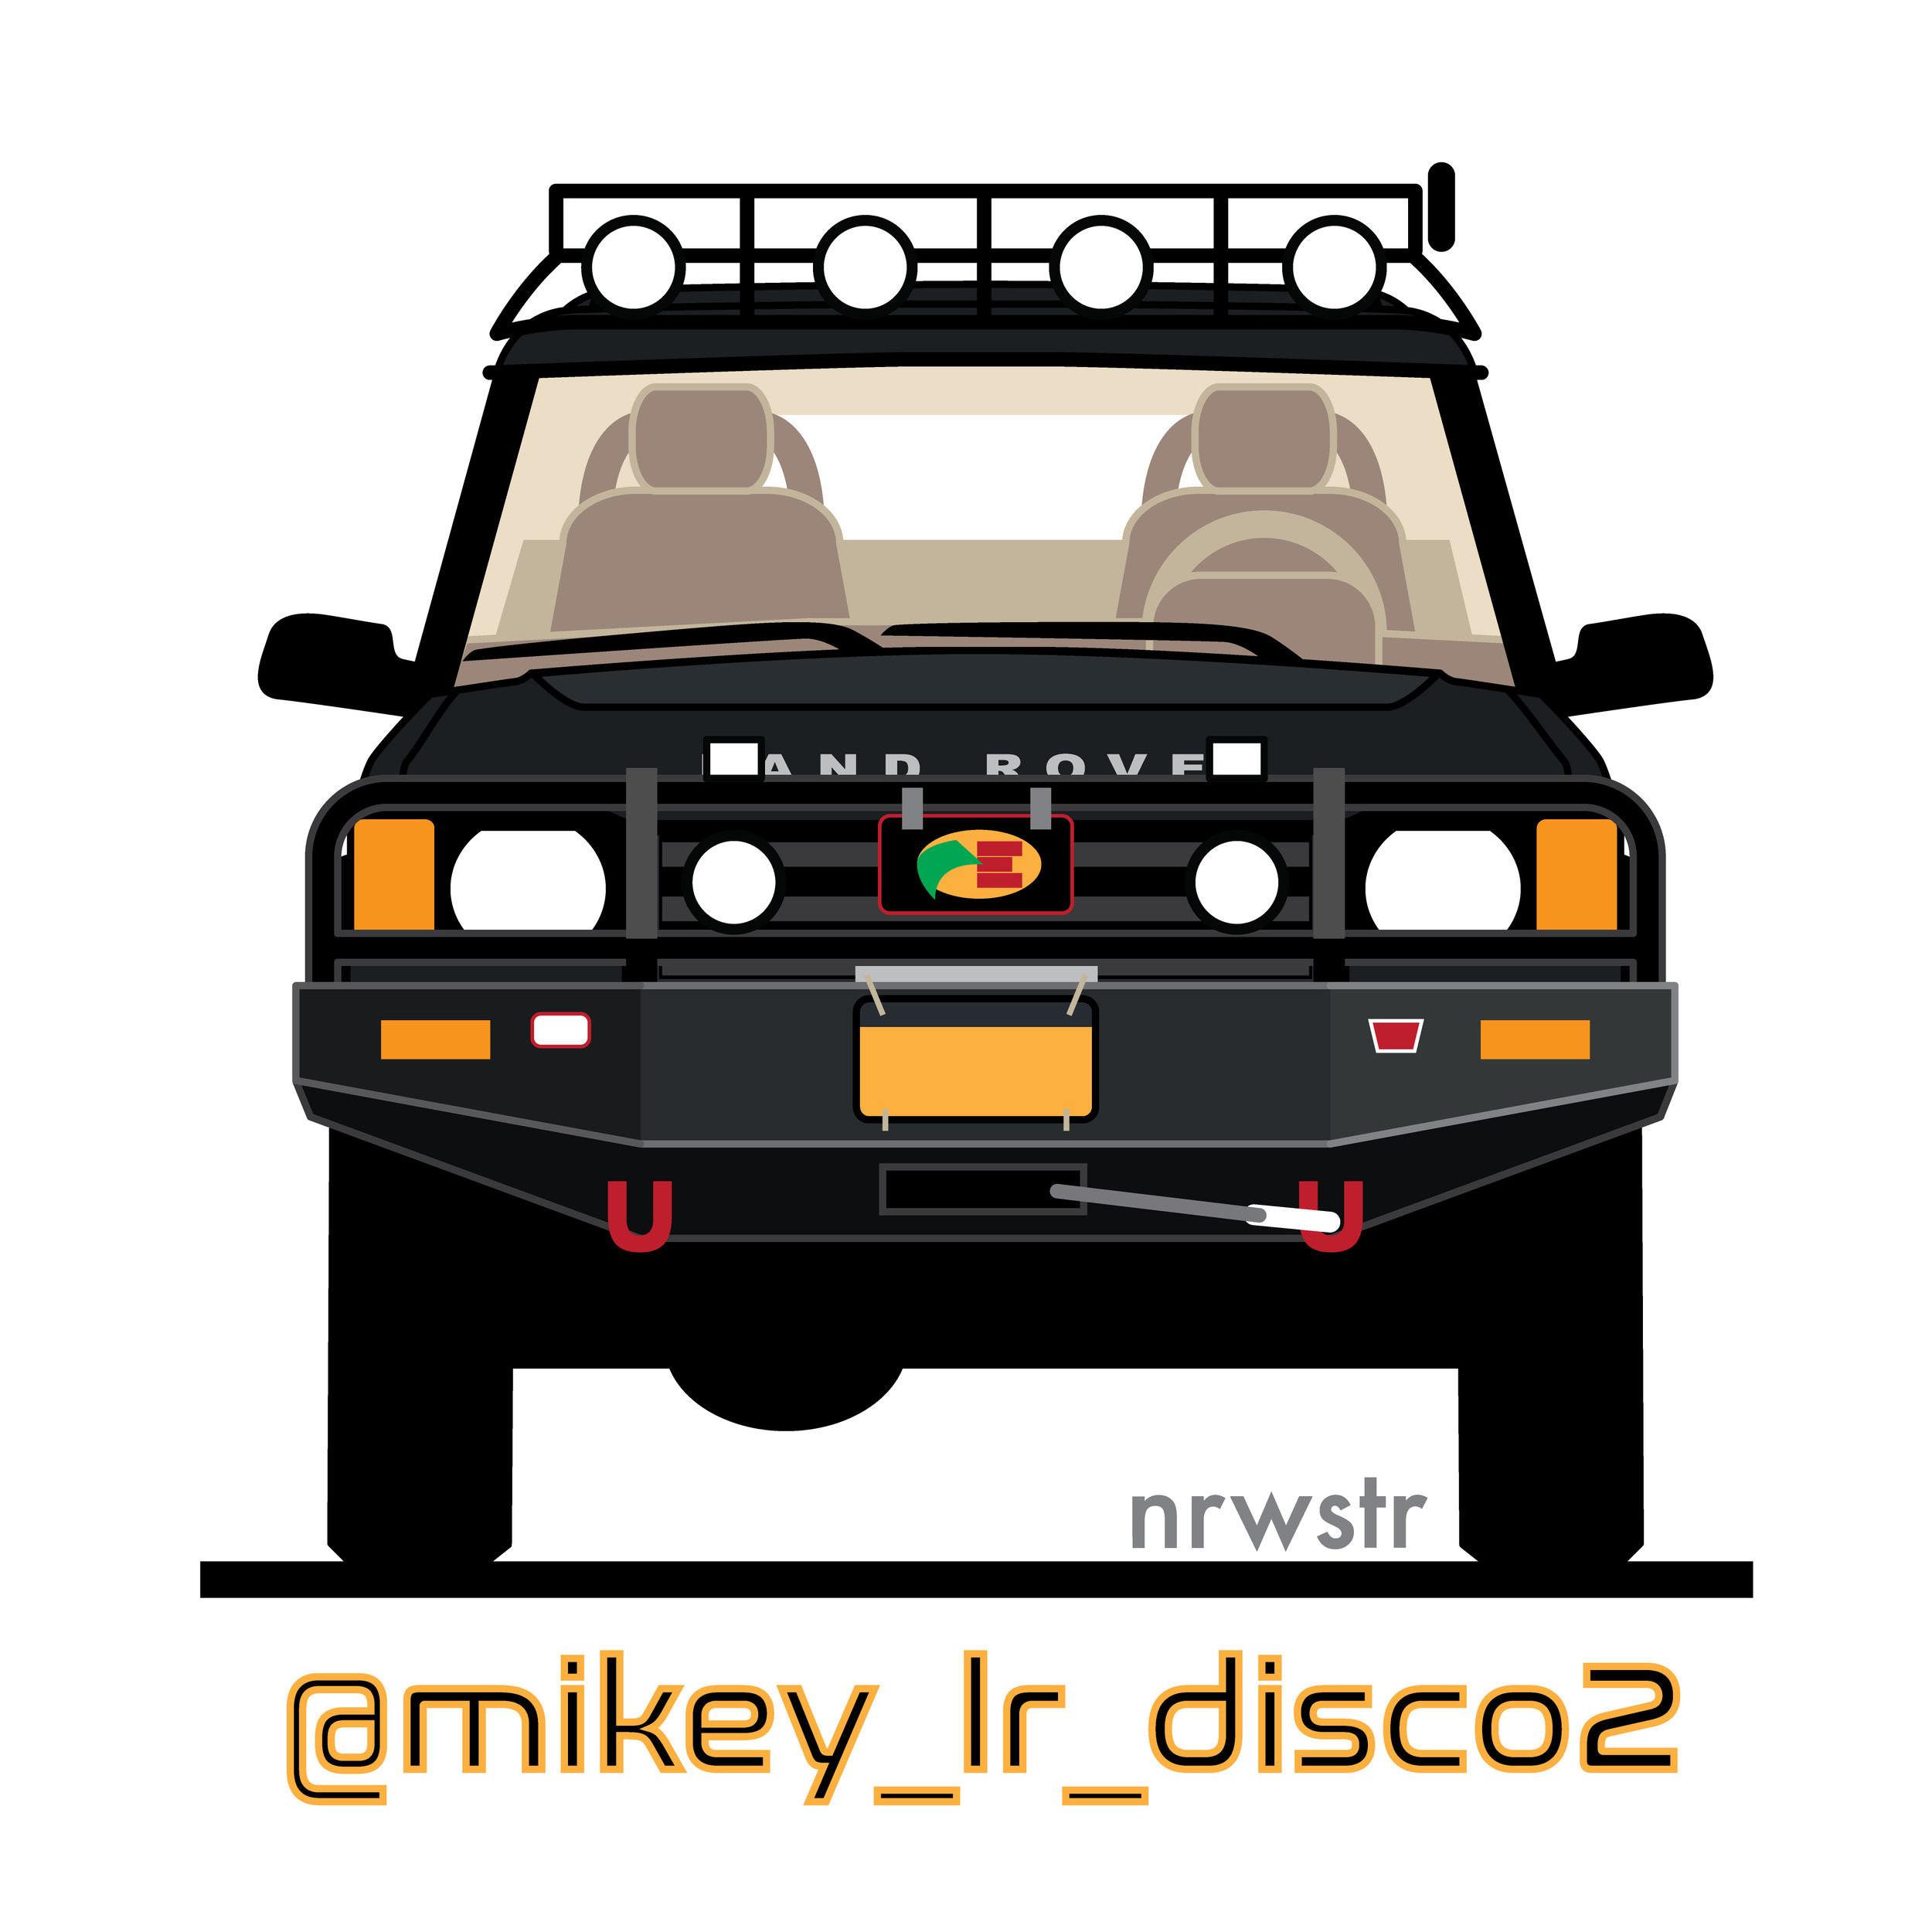 mikey_lr_disco2-discovery-front-view.jpg